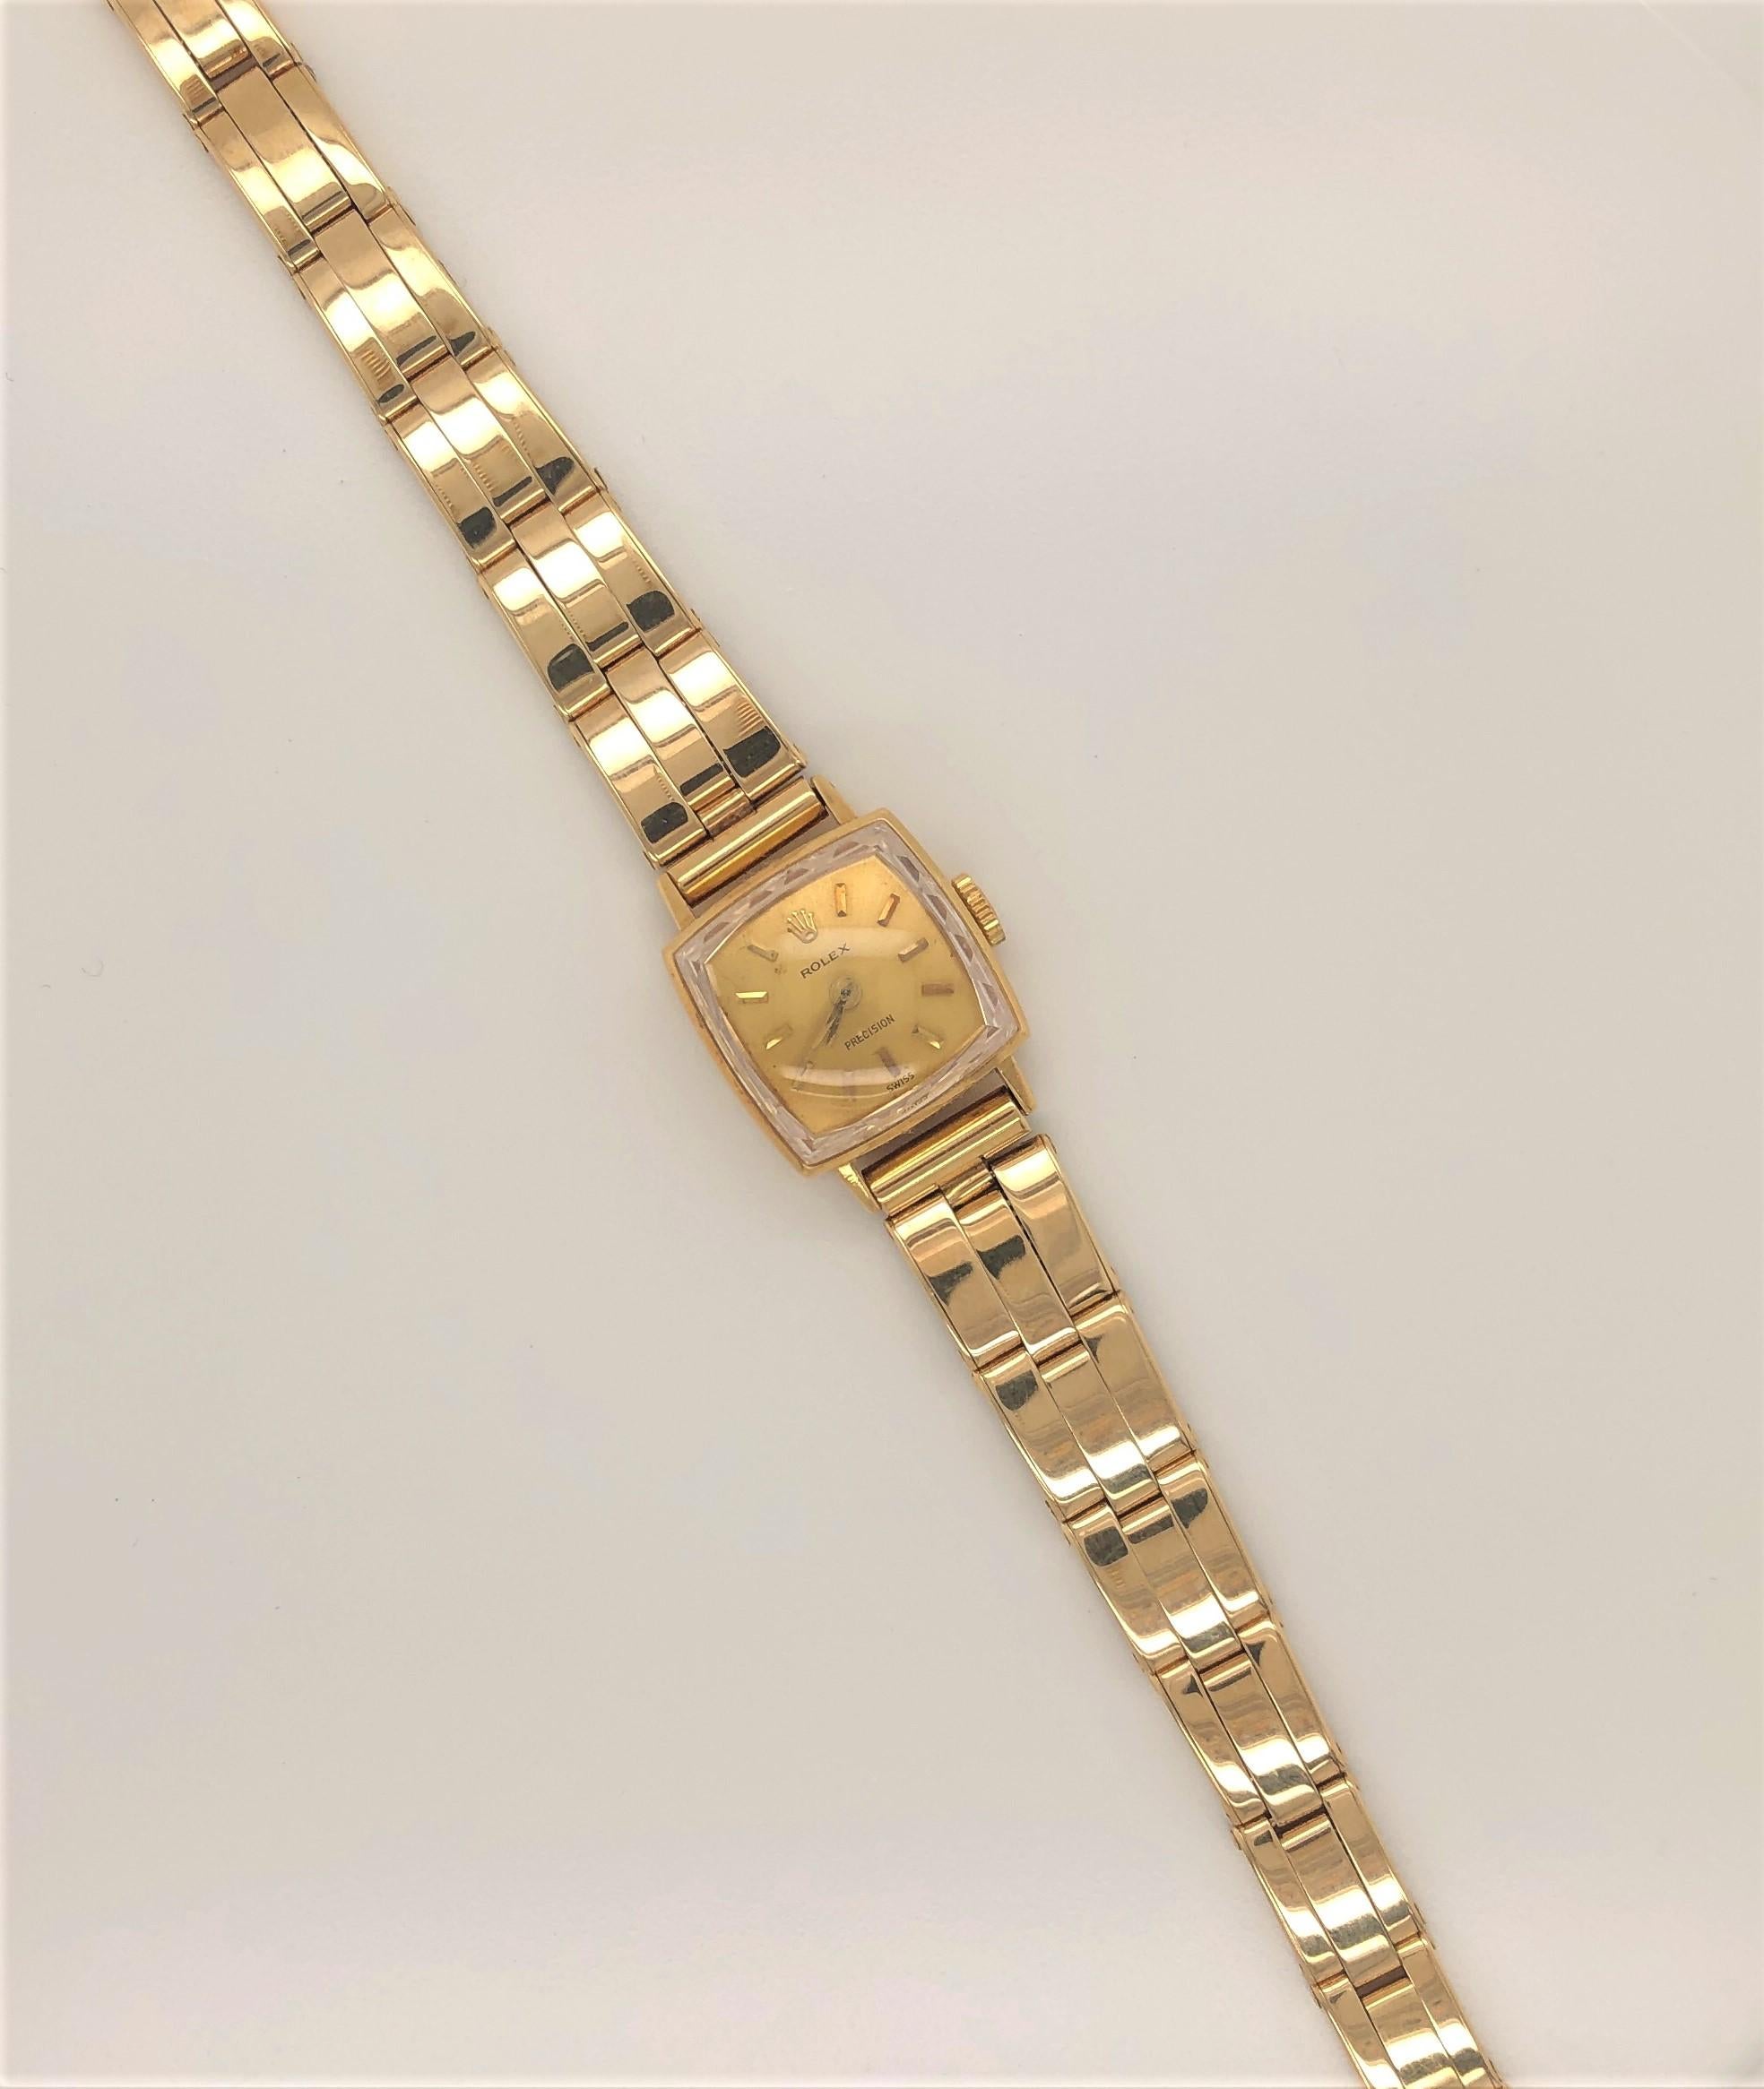 Circa 1960's, Ladies Rolex 1400 Yellow Gold Bracelet Watch. After market seven inch graduated fourteen carat yellow gold link bracelet band with double safety clasp. Square Rolex watch head with eighteen carat gold face, match stick markings and